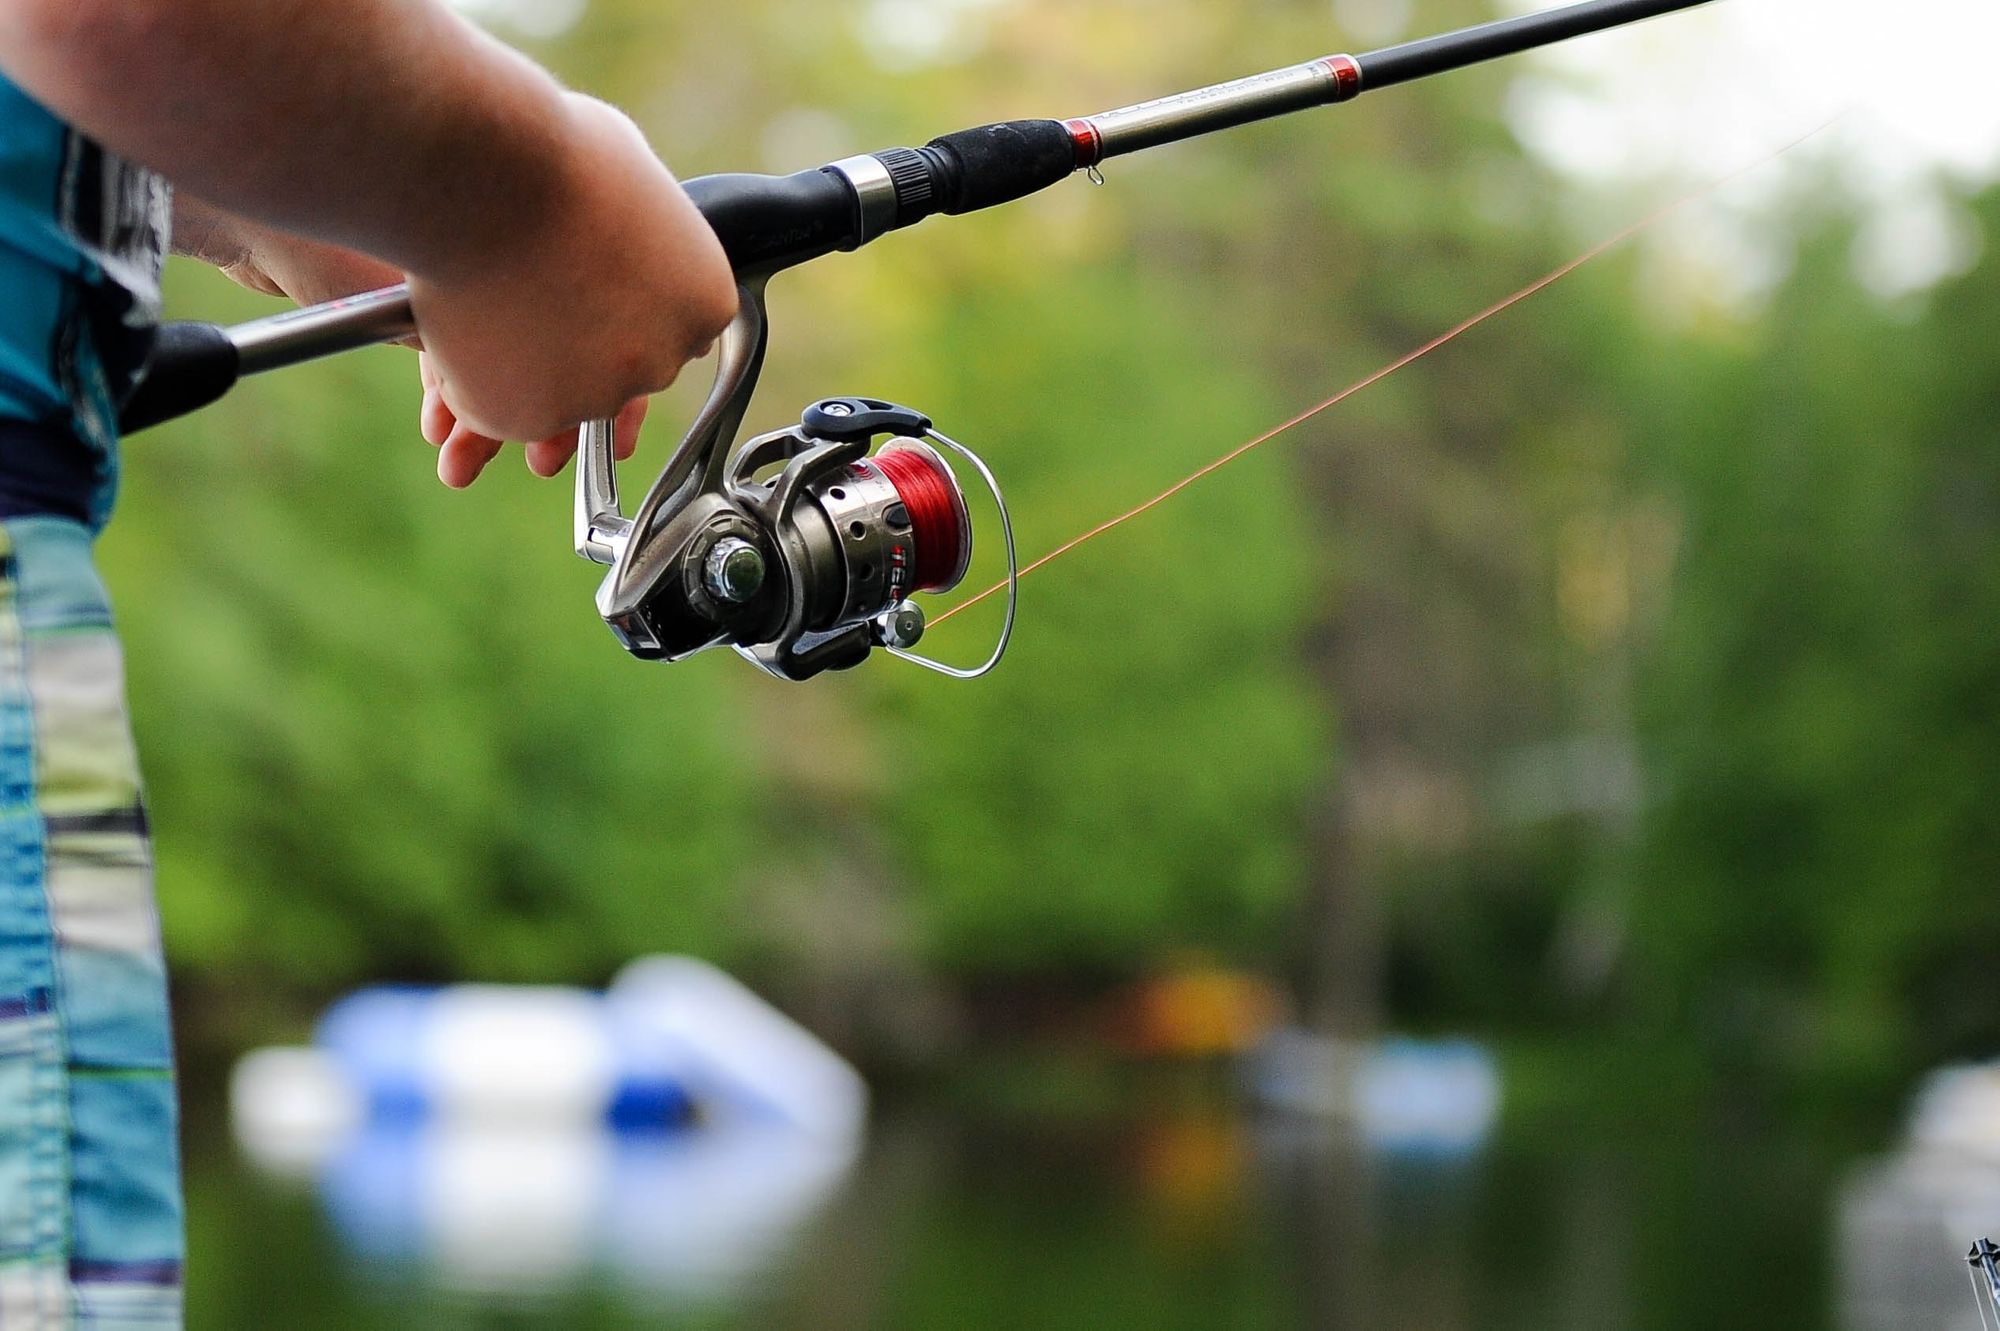 Bubble App of The Day: My Fishing Tournament